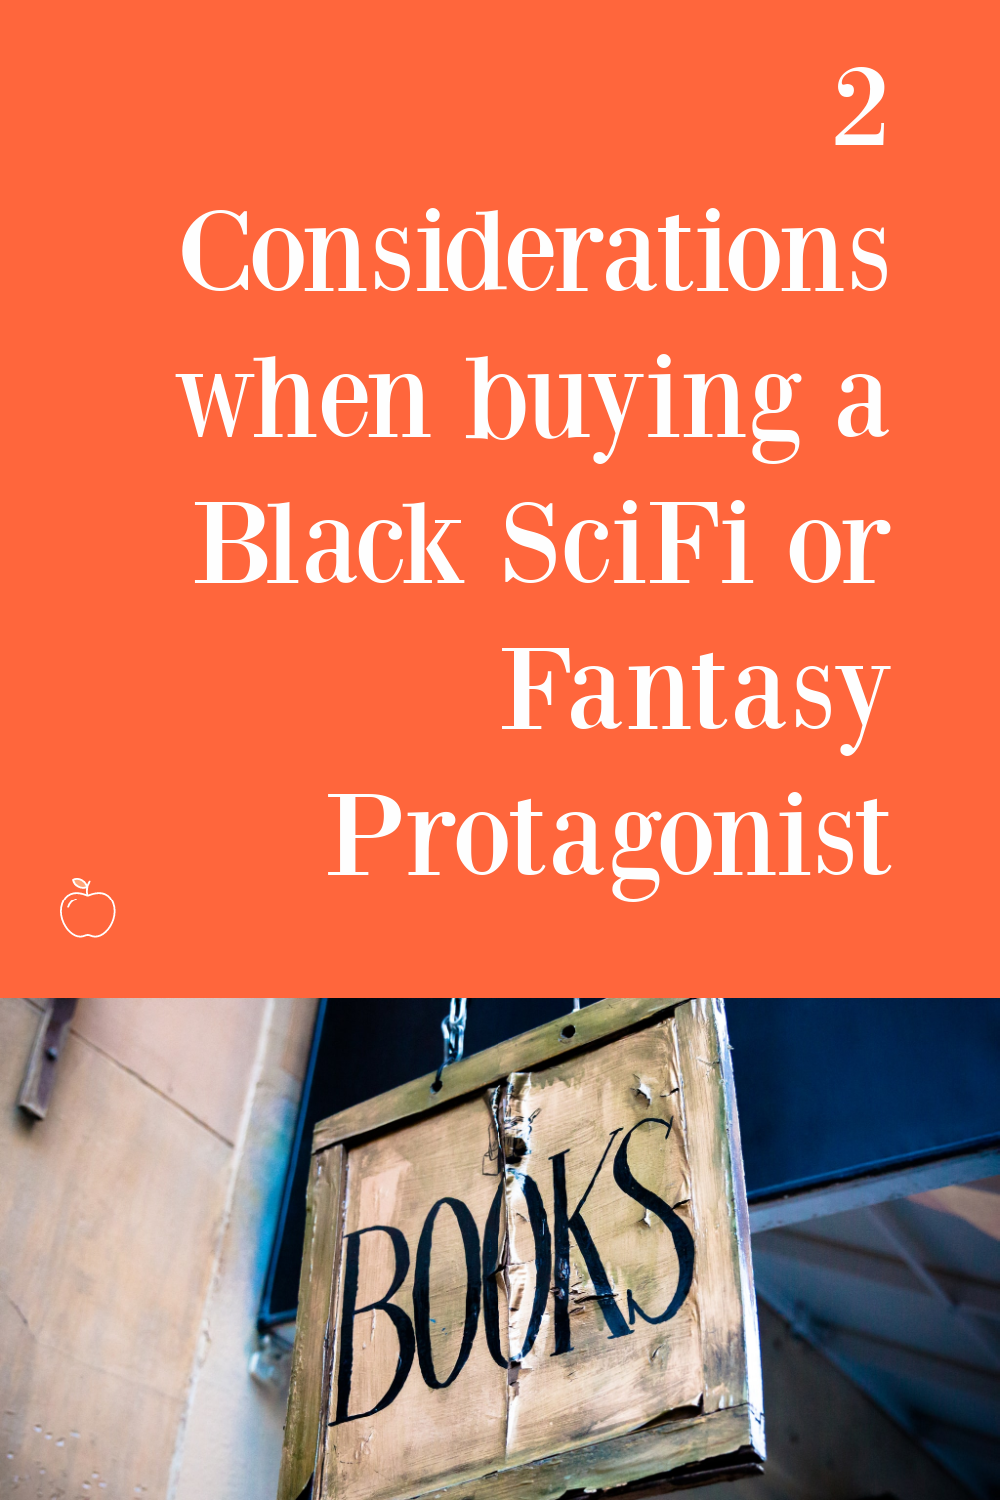 Two Considerations When Purchasing a Book with a Black SciFi or Fantasy Protagonist